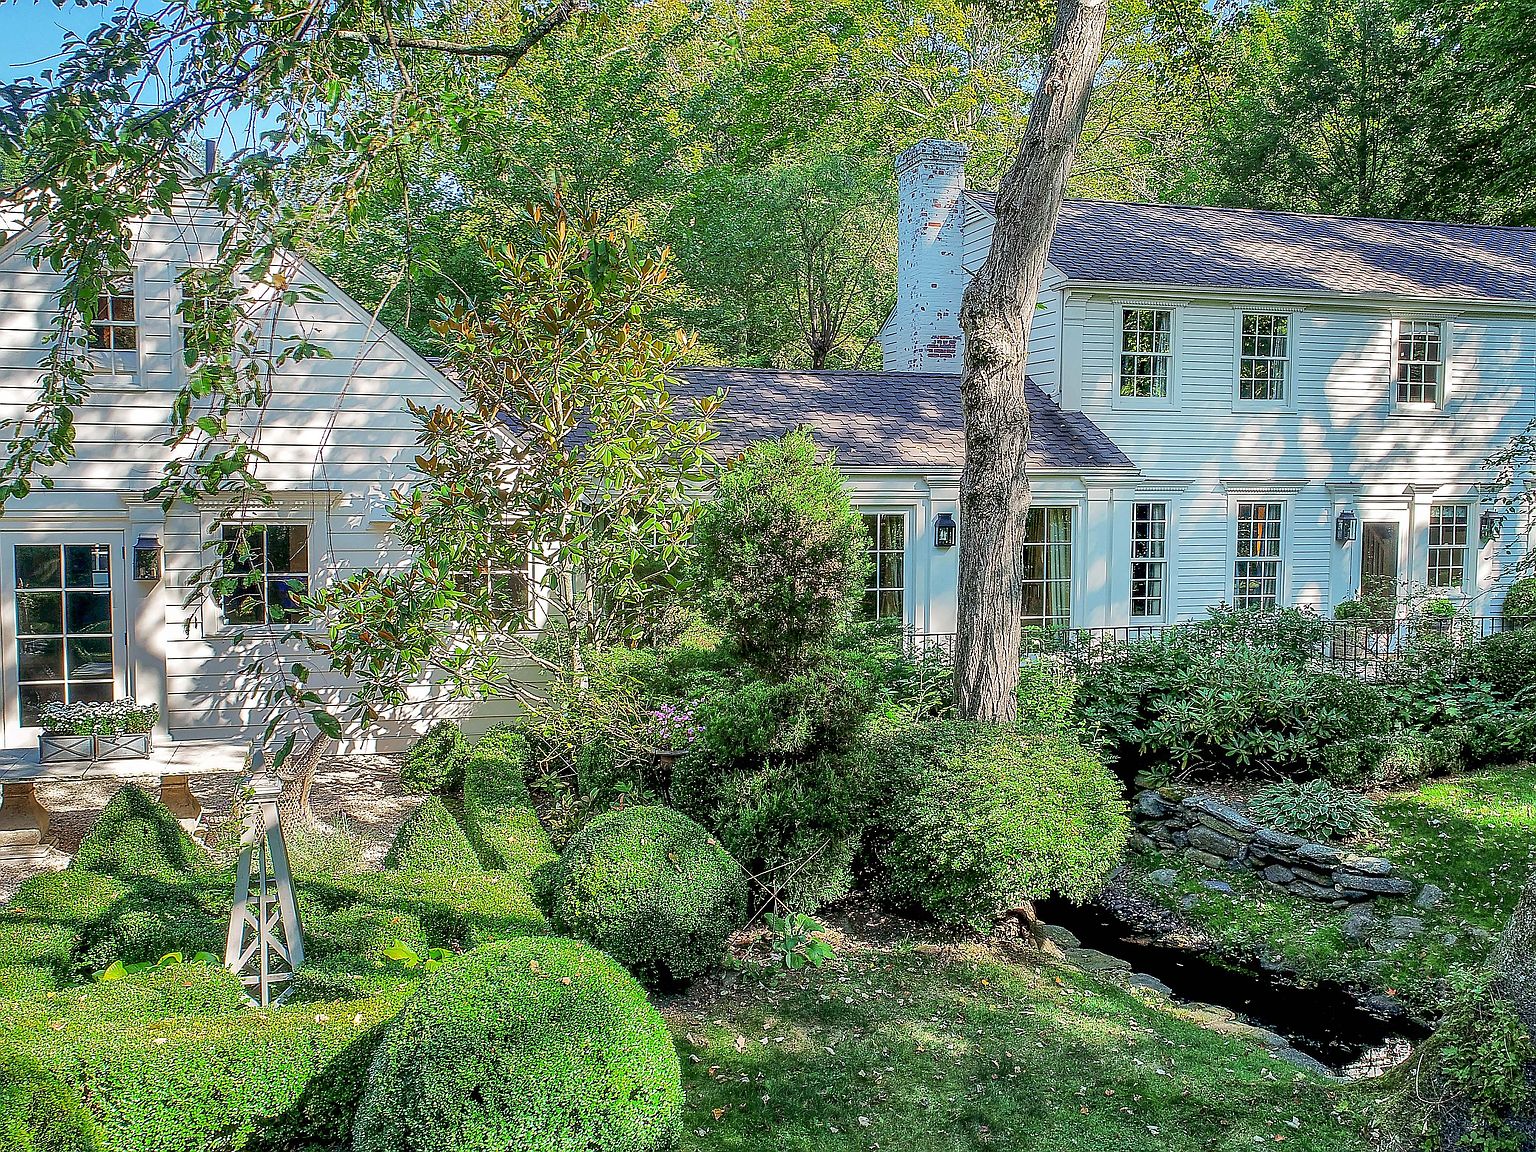 166 Old Church Rd, Greenwich, Ct 06830 | Zillow